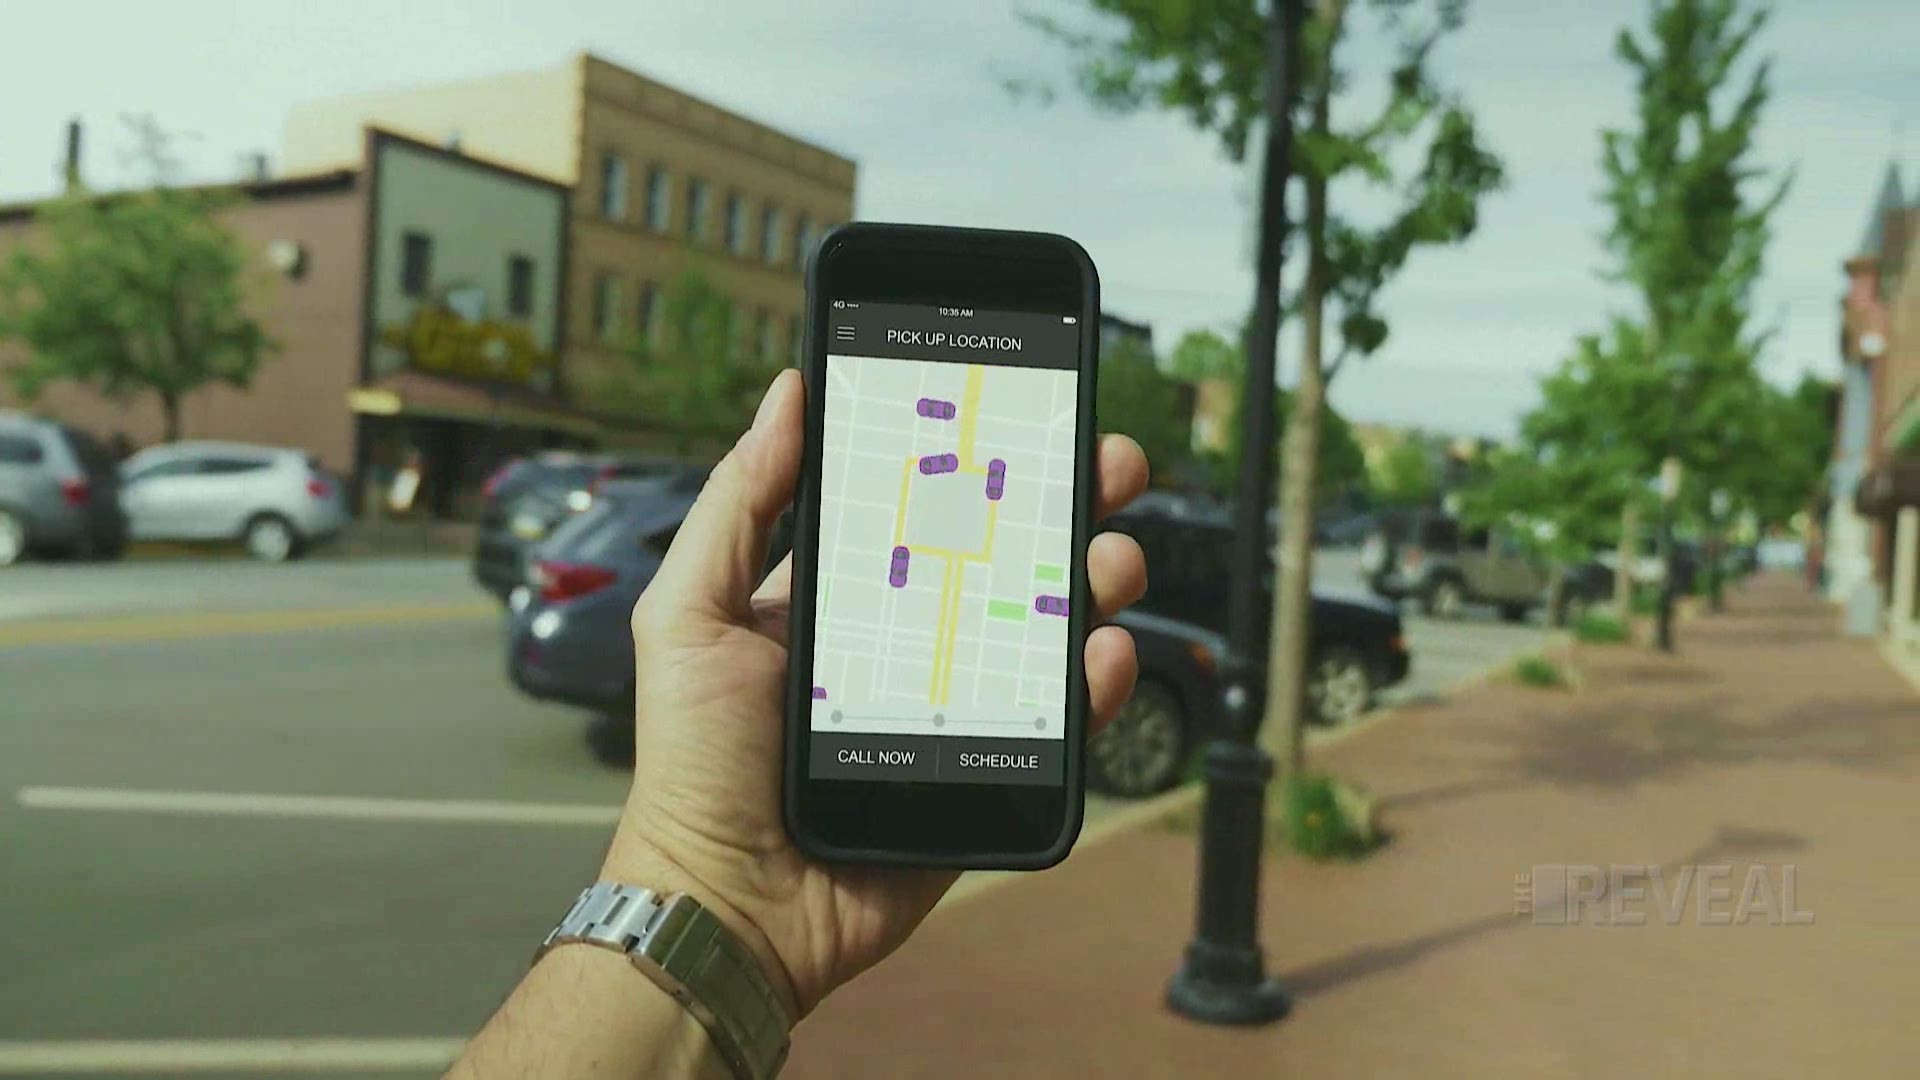 Companies have access to location data from your phone for up to 30 days after you walk into their invisible geofence. It could be a hospital, mall, auto dealership, or any other building.